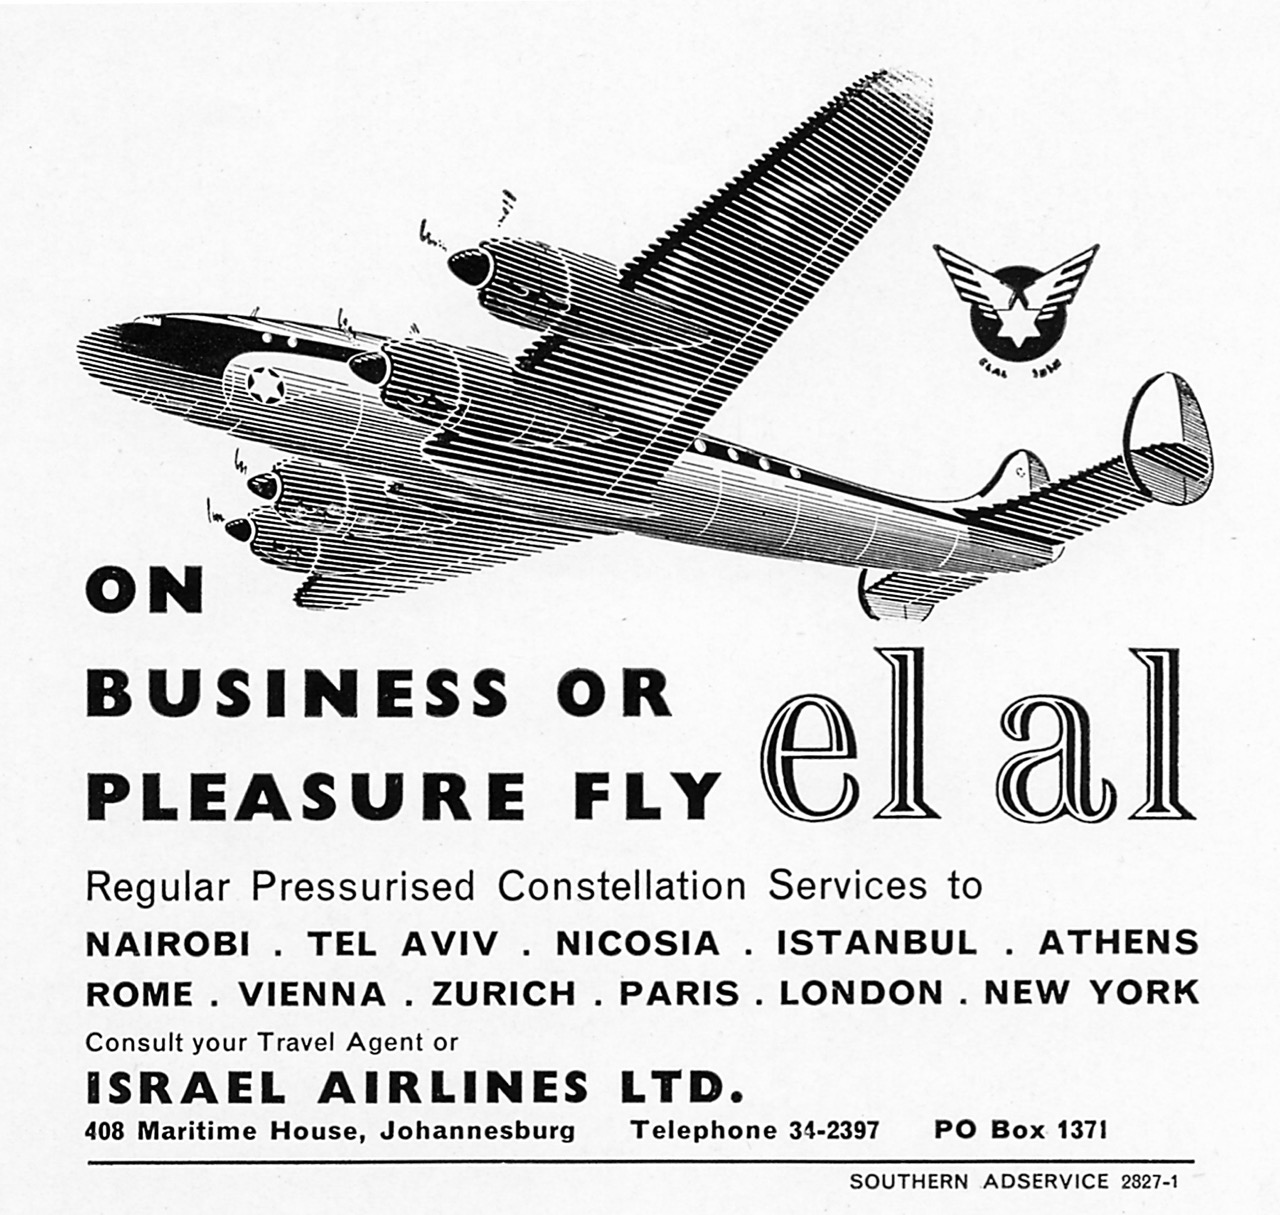 EL AL Johannesburg, South Africa, advertisement, publicizing travel to Tel Aviv and beyond, about 1951. (MG collection via Hans Winter)